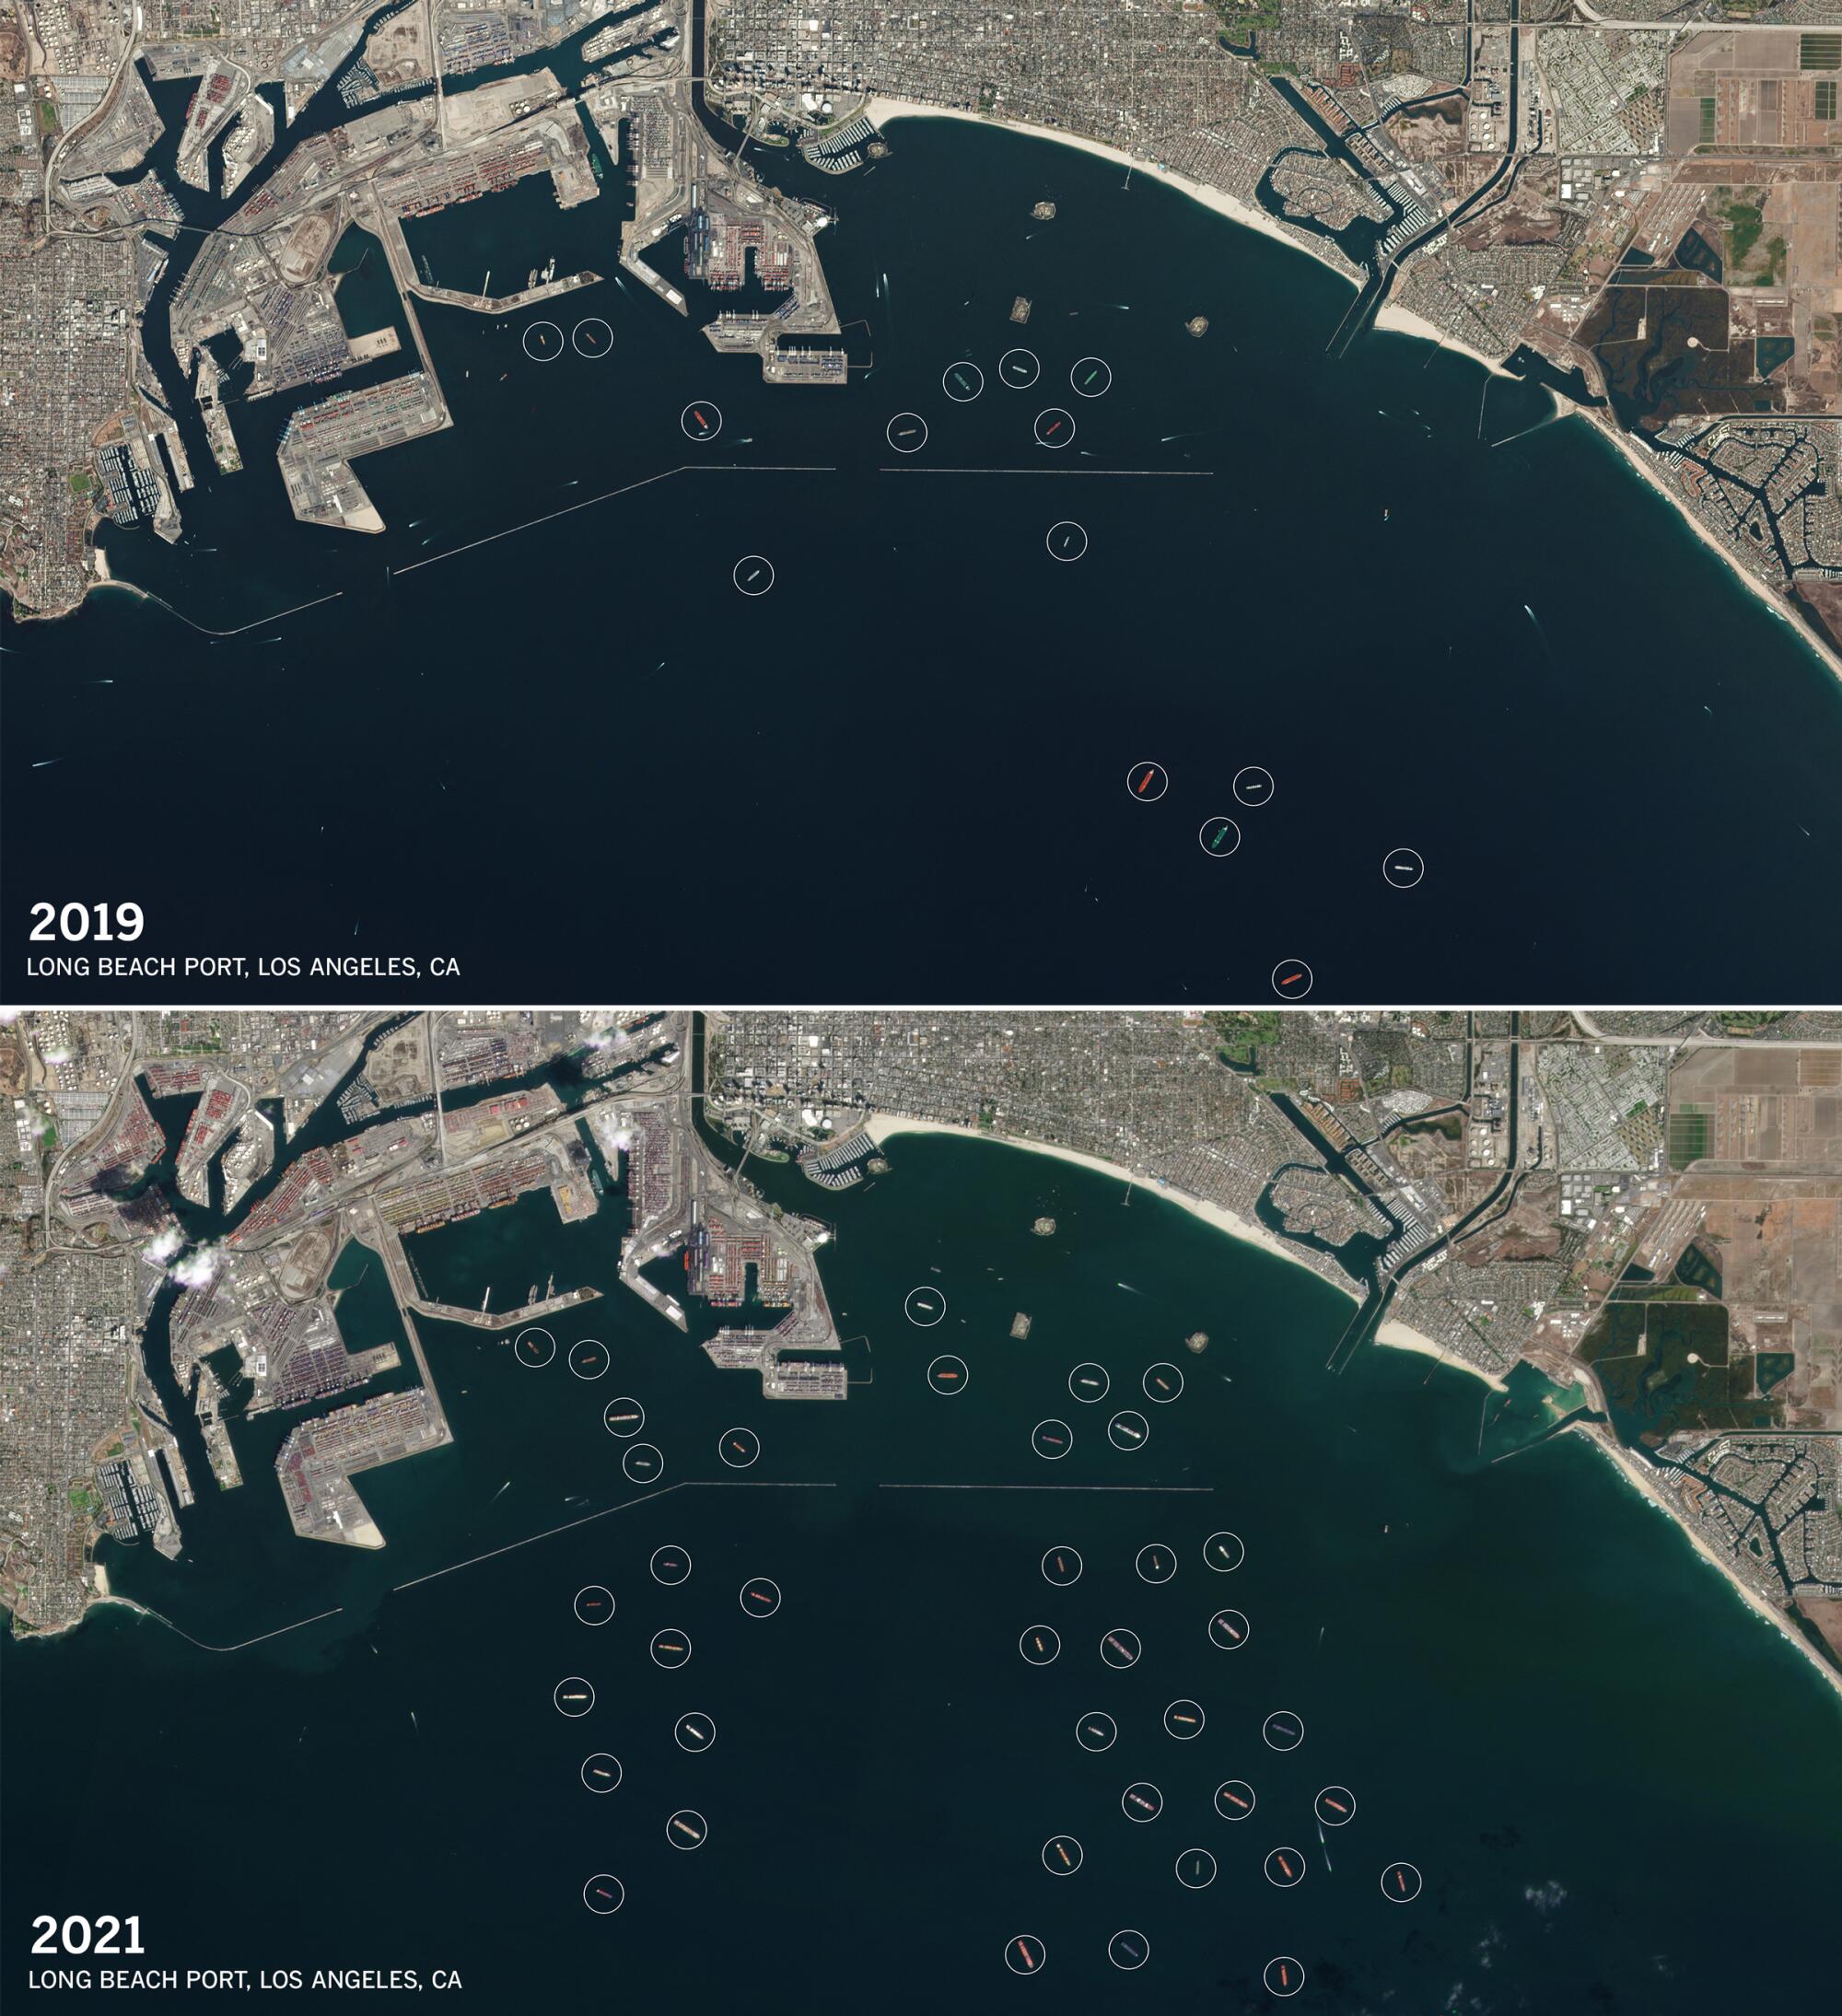 Satellite photos of Long Beach Port comparing 2019 to 2021.